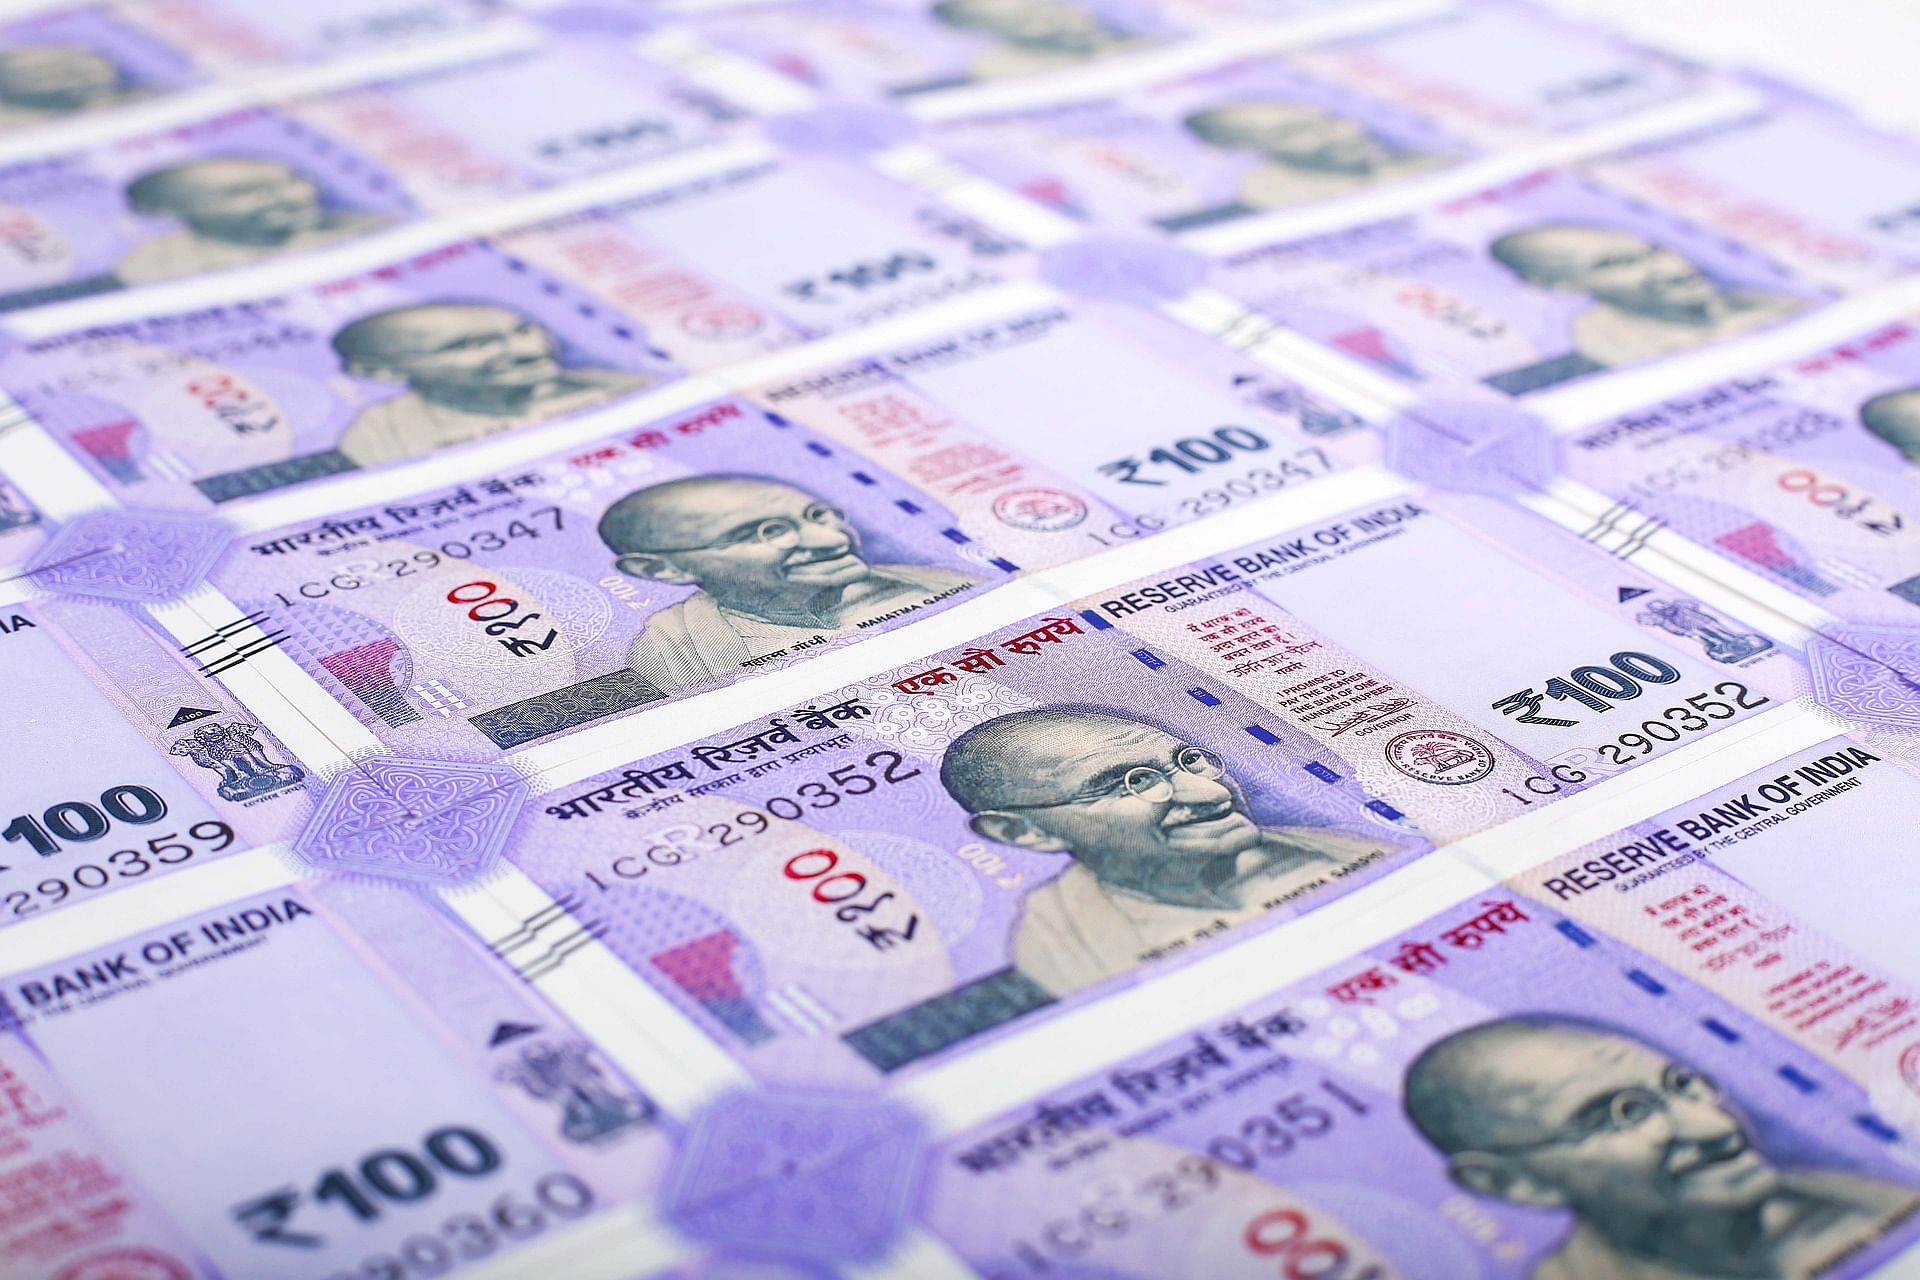 A Bhuj B Division police team raided the house of Atul Vora and seized 37 notes of Rs 100 denomination which he had got from Ishwar Patel living in Bengaluru, an official said. (Representative Image/Image by F1 Digitals from Pixabay)